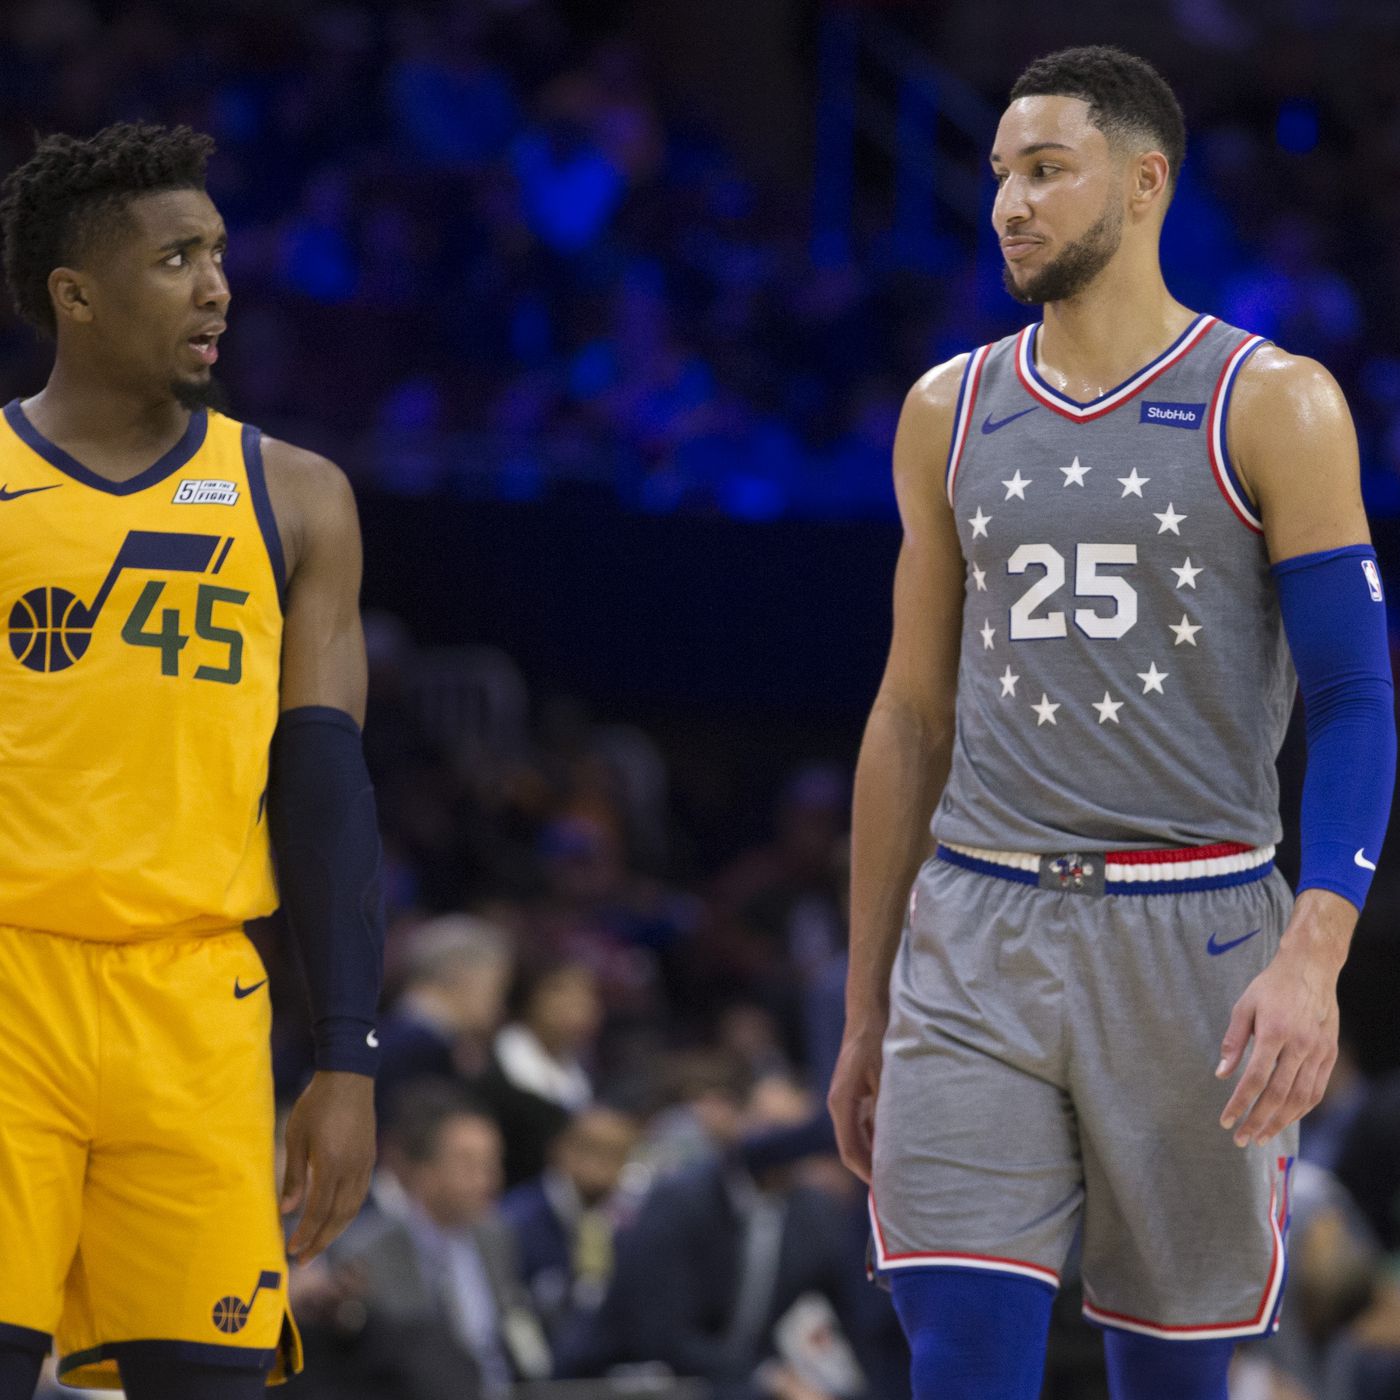 The Ben Simmons-Donovan Mitchell Rookie of the Year beef is